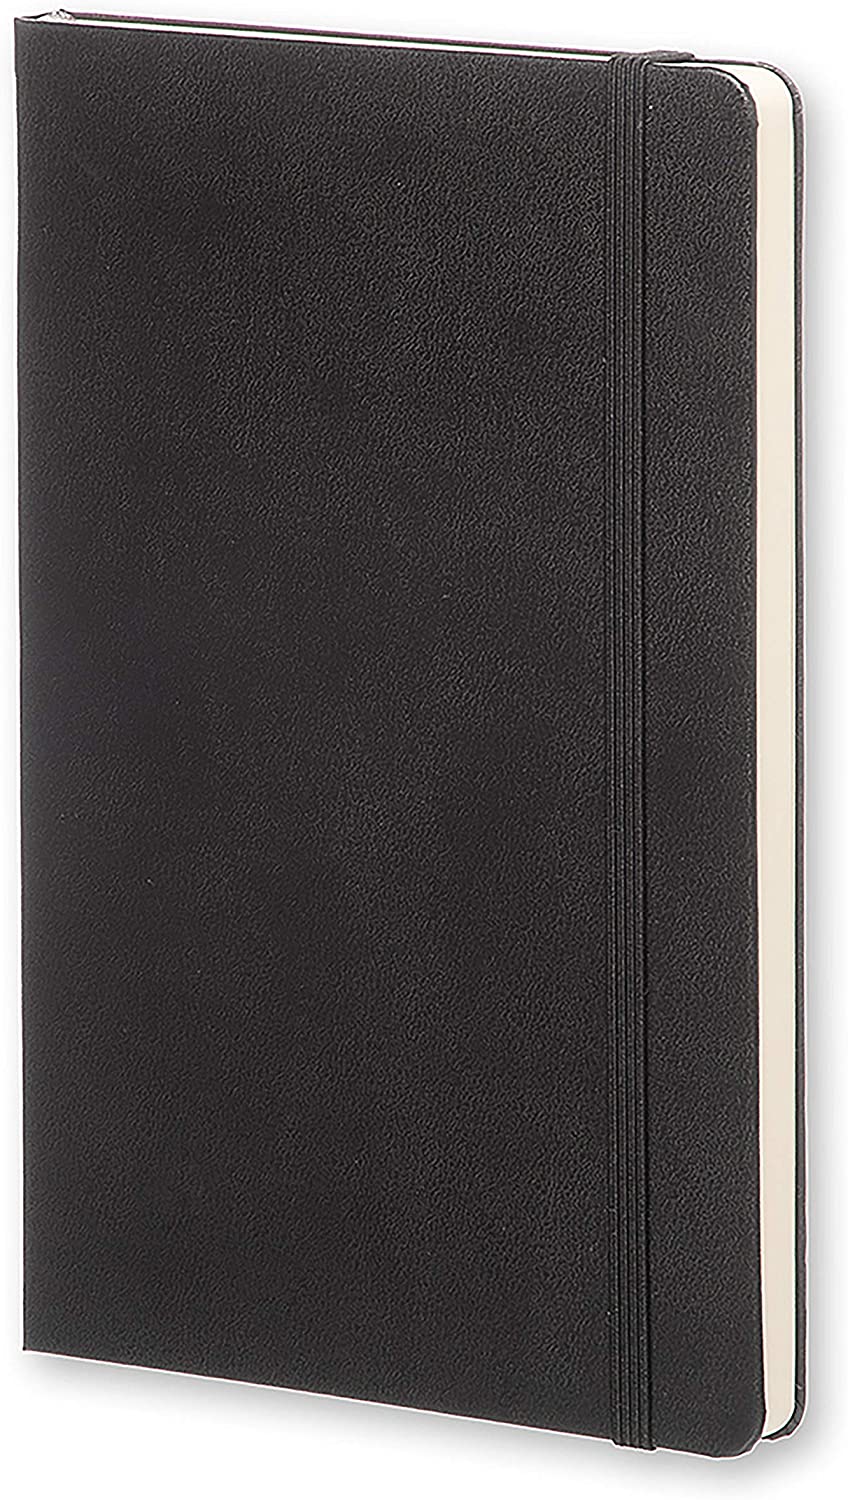 Leather Moleskine Classic Notebook Black available for online shopping in Pakistan at Chapters Bookstore